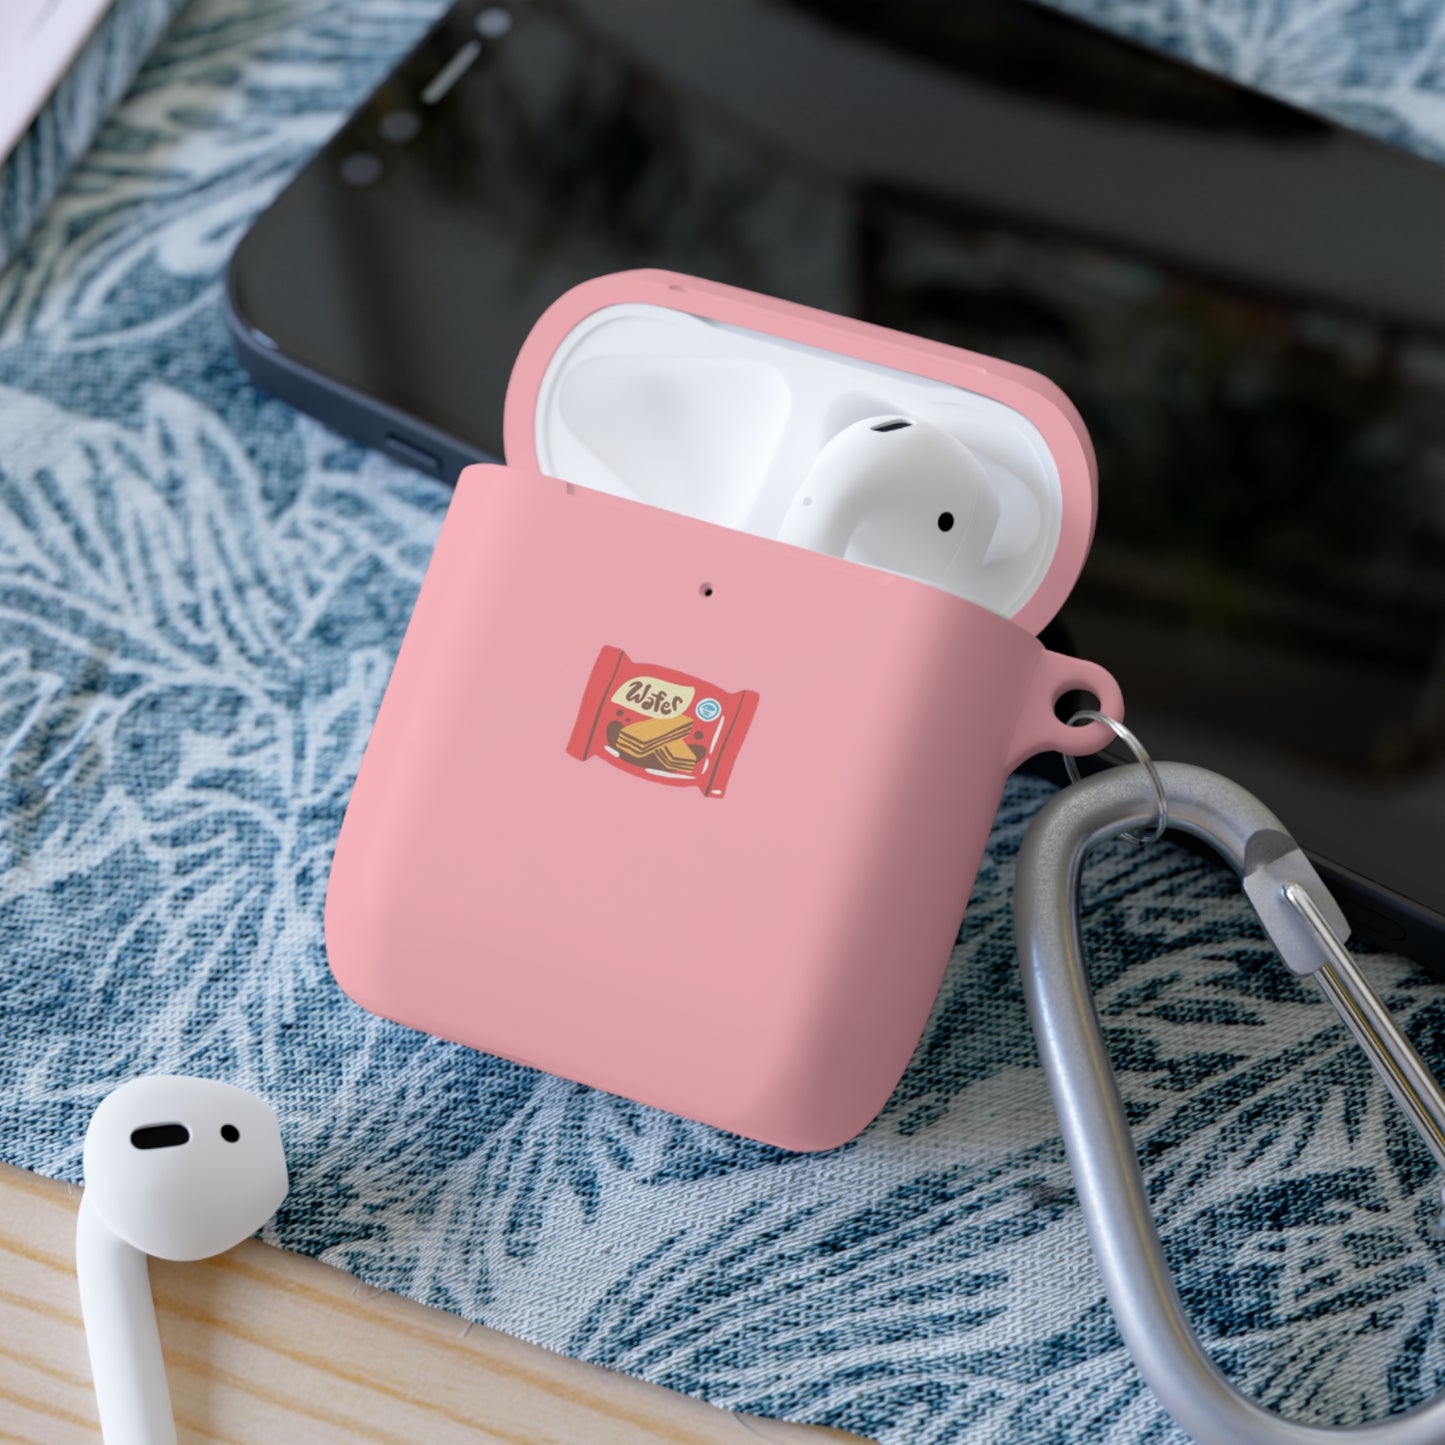 Tsalack Express  AirPods and AirPods Pro Case Cover